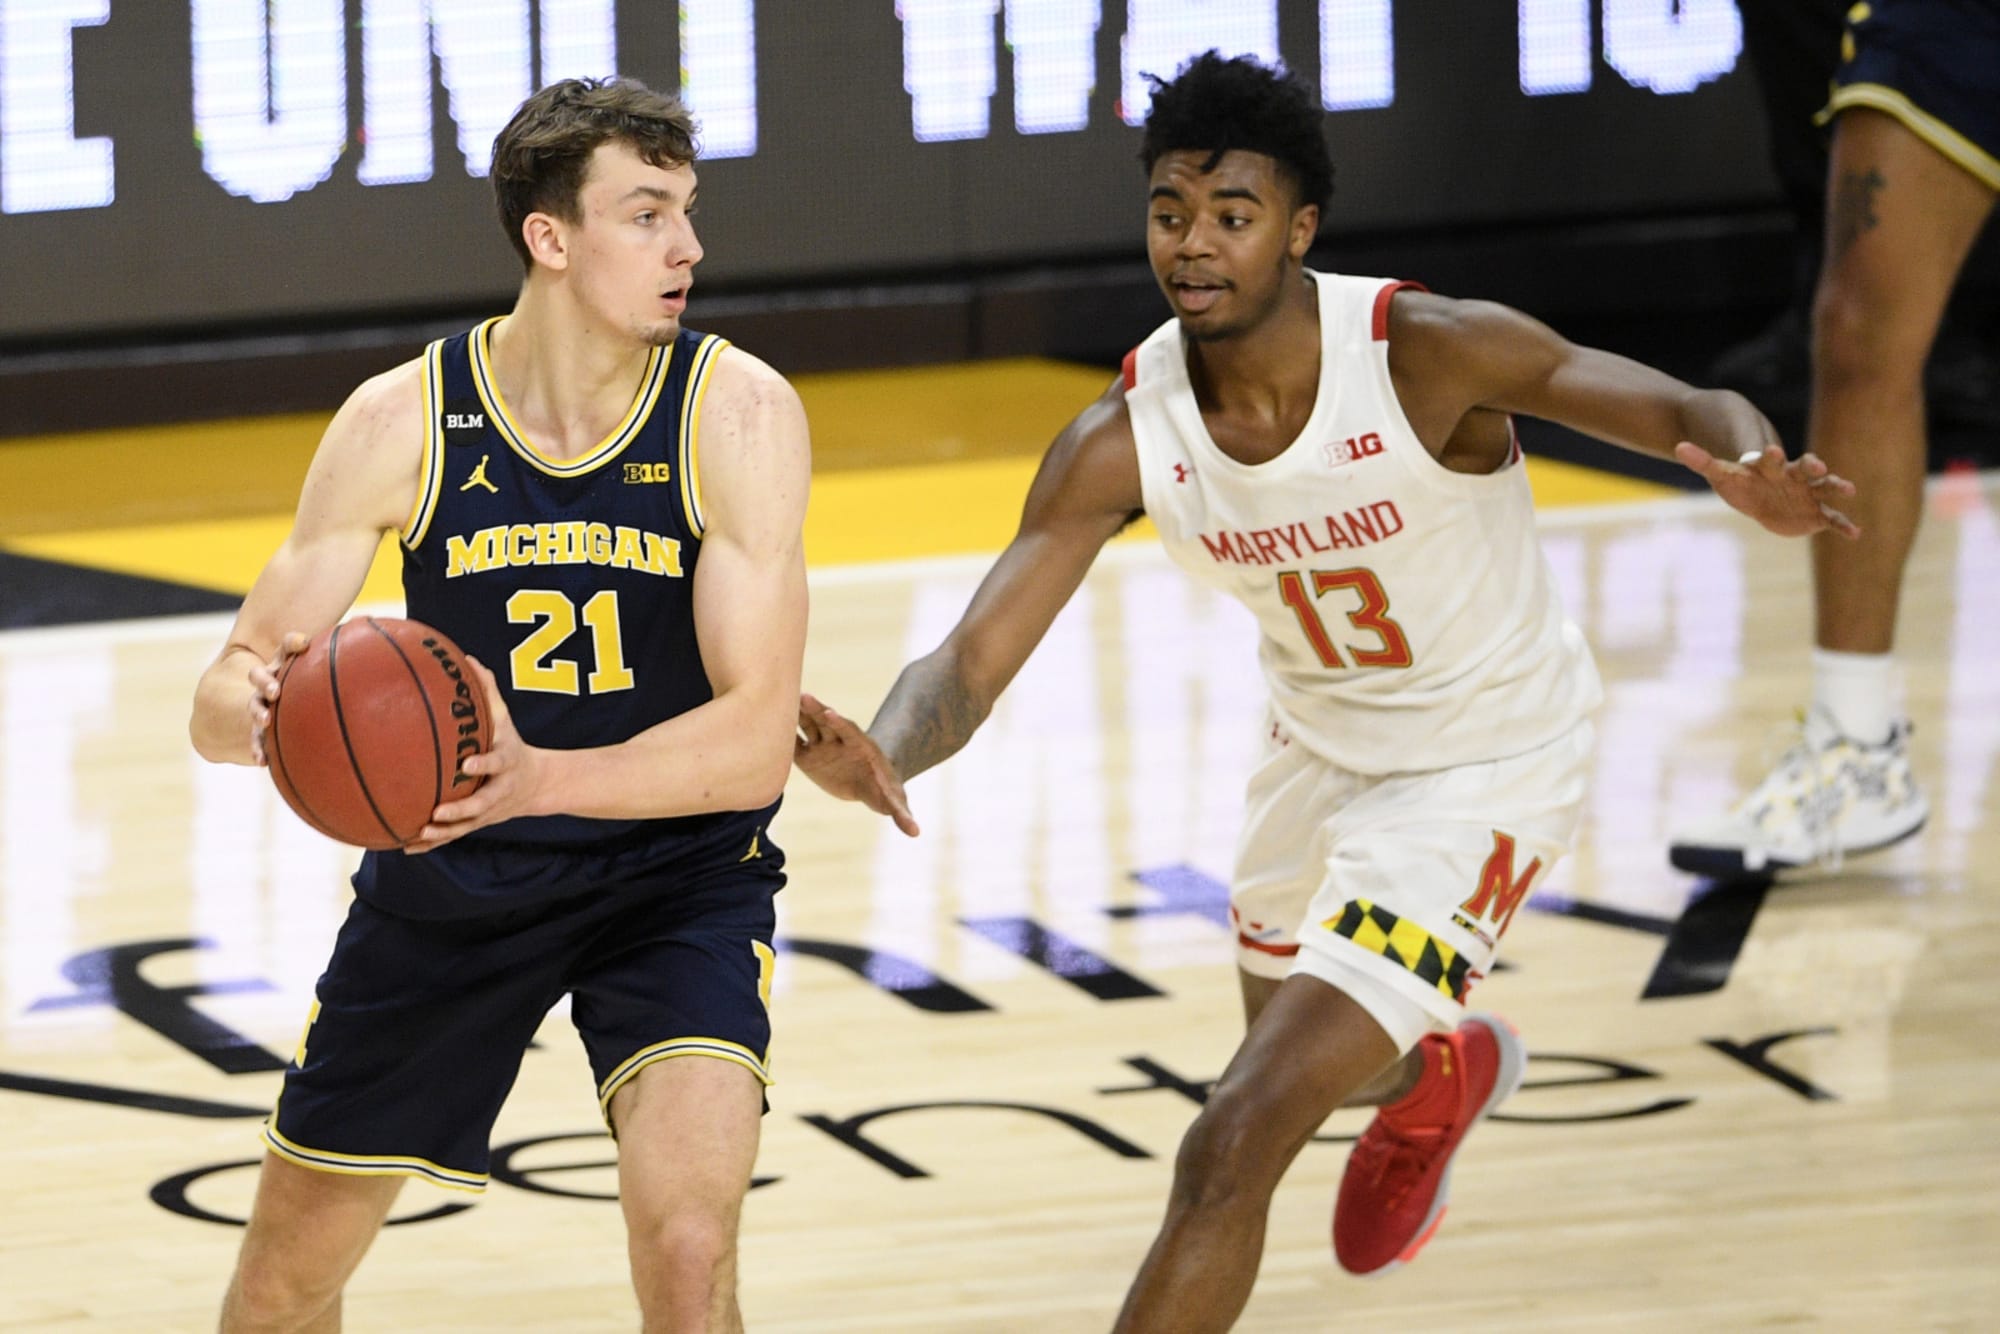 NBA Draft 2021: A look at the 10 best Big Ten Basketball prospects - Busting Brackets